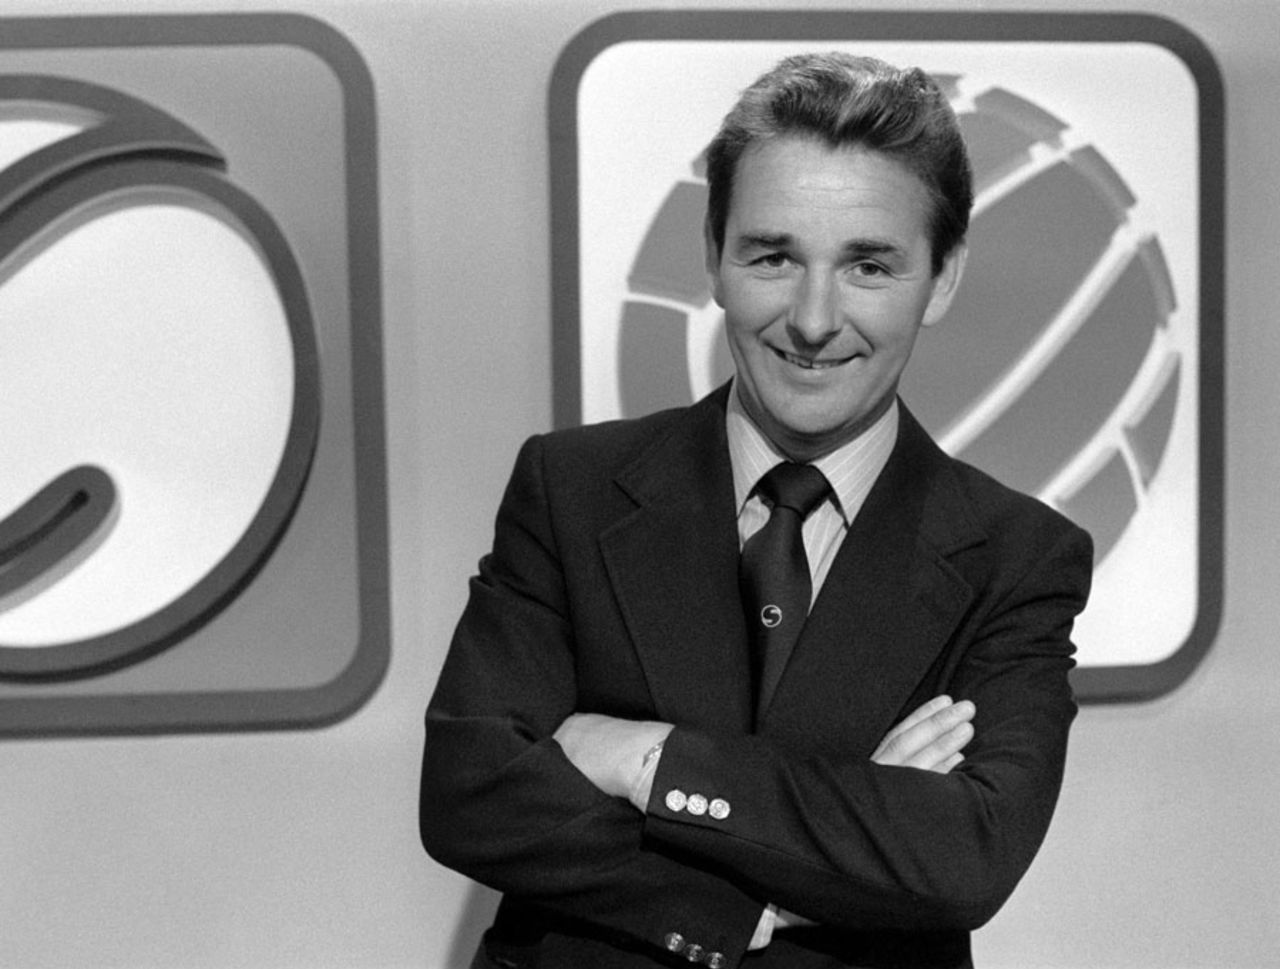 Brian Clough in the World of Sport studio, August 23, 1973